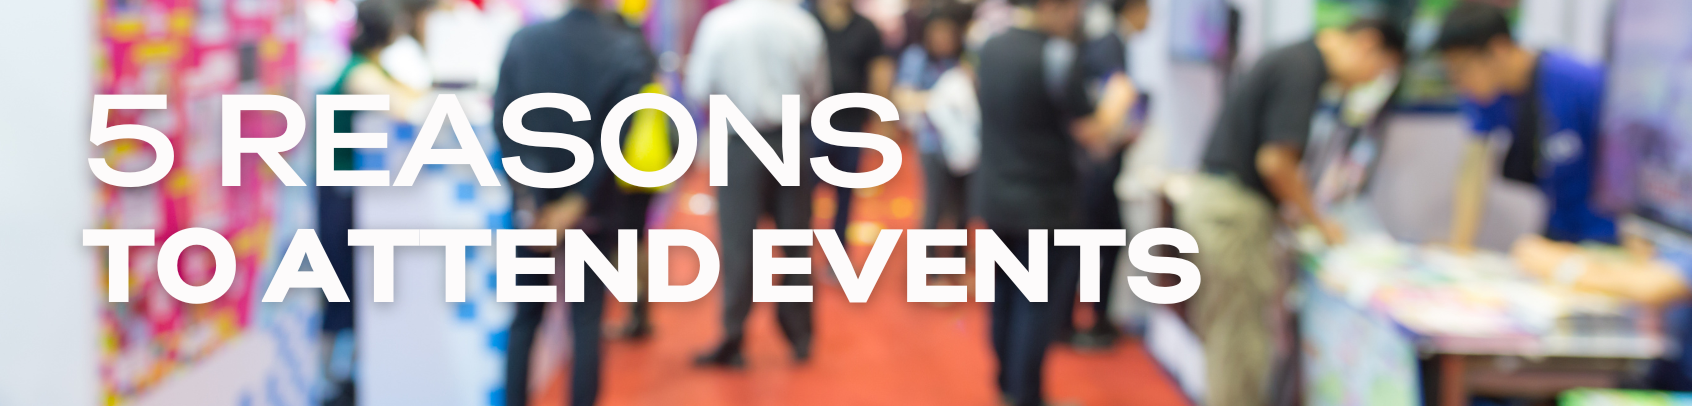 5 Reasons to Attend Events